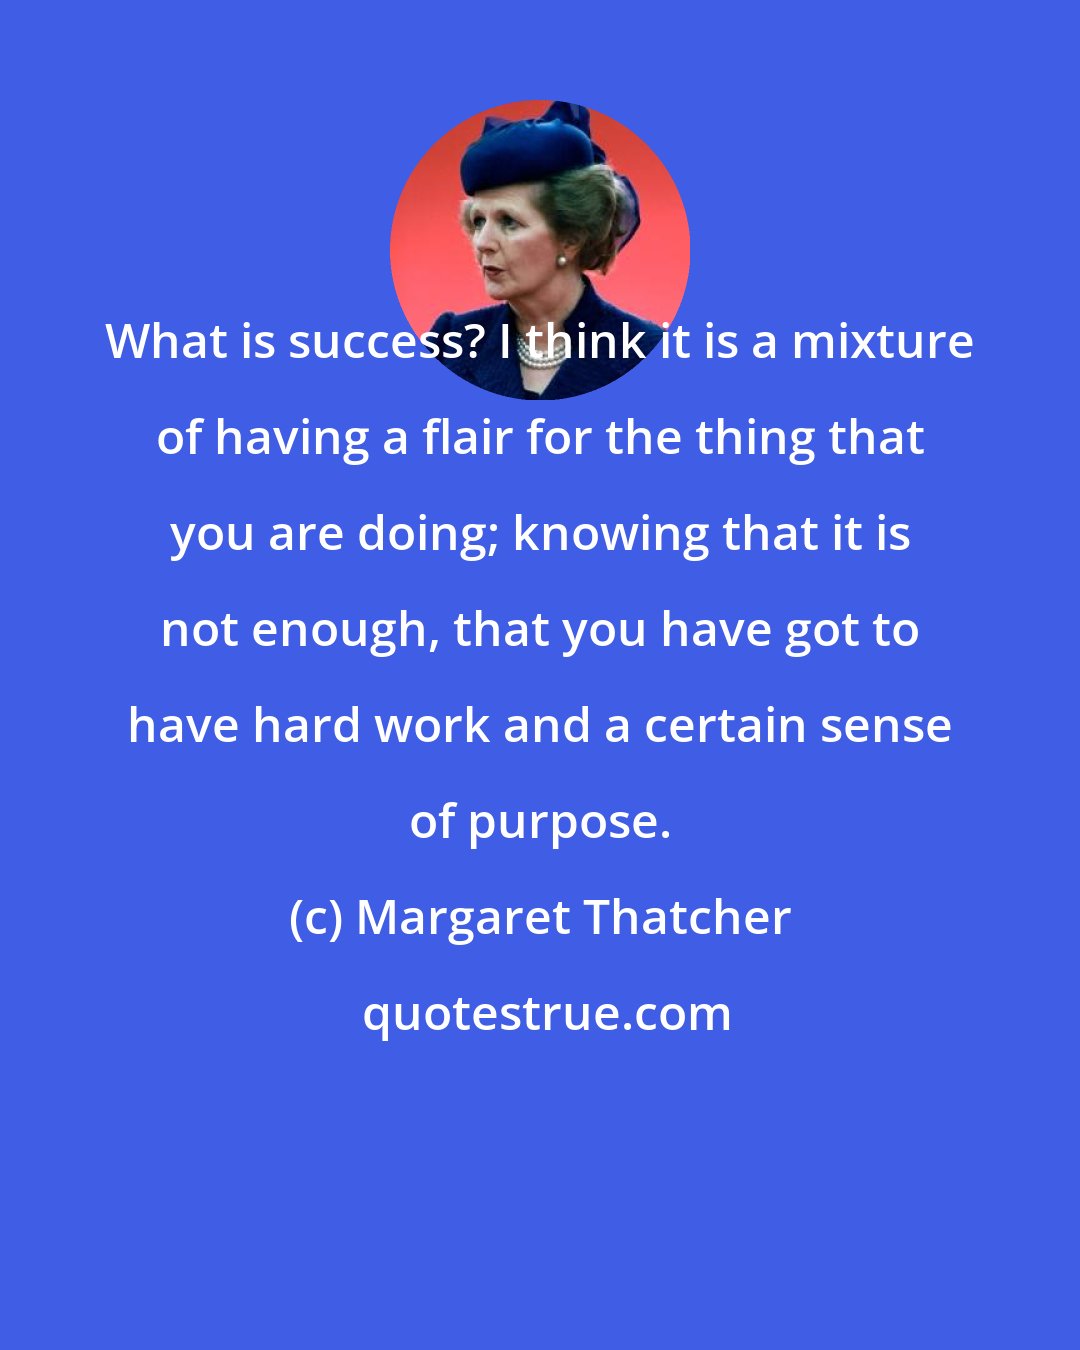 Margaret Thatcher: What is success? I think it is a mixture of having a flair for the thing that you are doing; knowing that it is not enough, that you have got to have hard work and a certain sense of purpose.